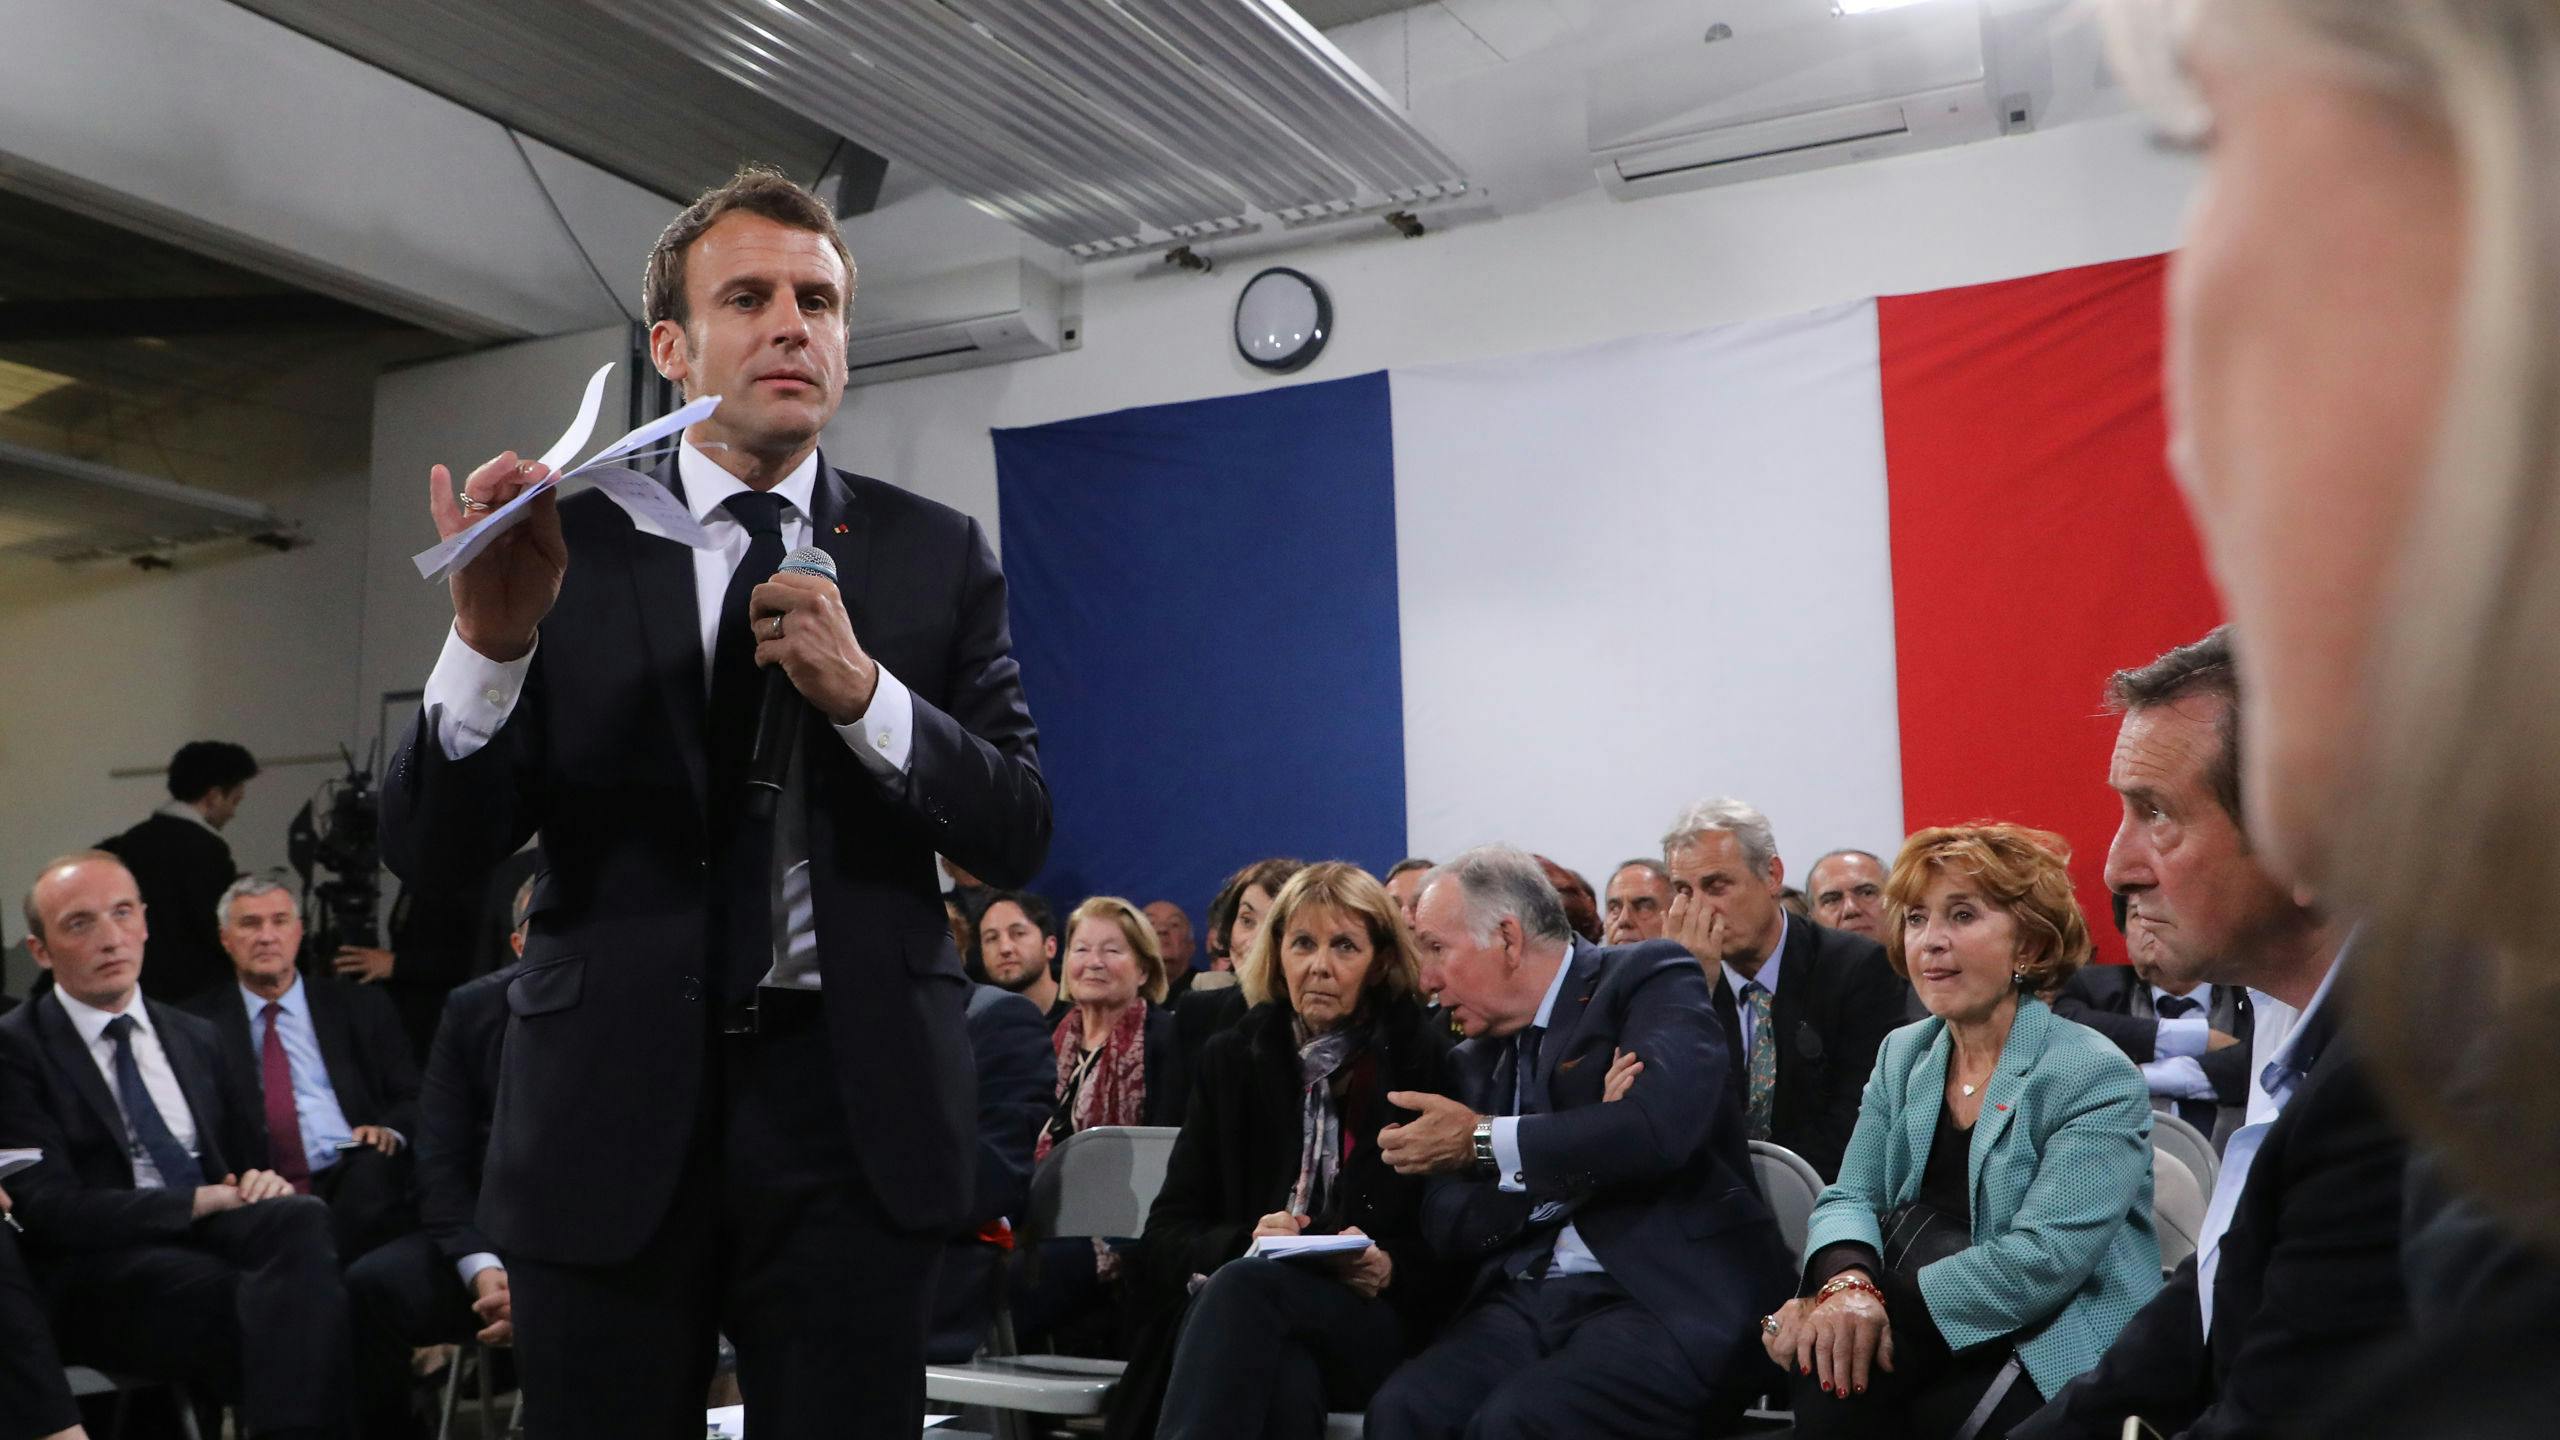 2019-04-04 20:28:04 French president Emmanuel Macron (L) speaks during the last public meeting set as part of his "Great National Debate" in Cozzano, on the French mediterranean island of Corsica, on April 4, 2019. French President Emmanuel Macron on April 4, 2019 wound up almost four months of town hall meetings aimed at reviving a presidency battered by weeks of street unrest with a prickly visit to France's Mediterranean island of Corsica. Ludovic MARIN / AFP